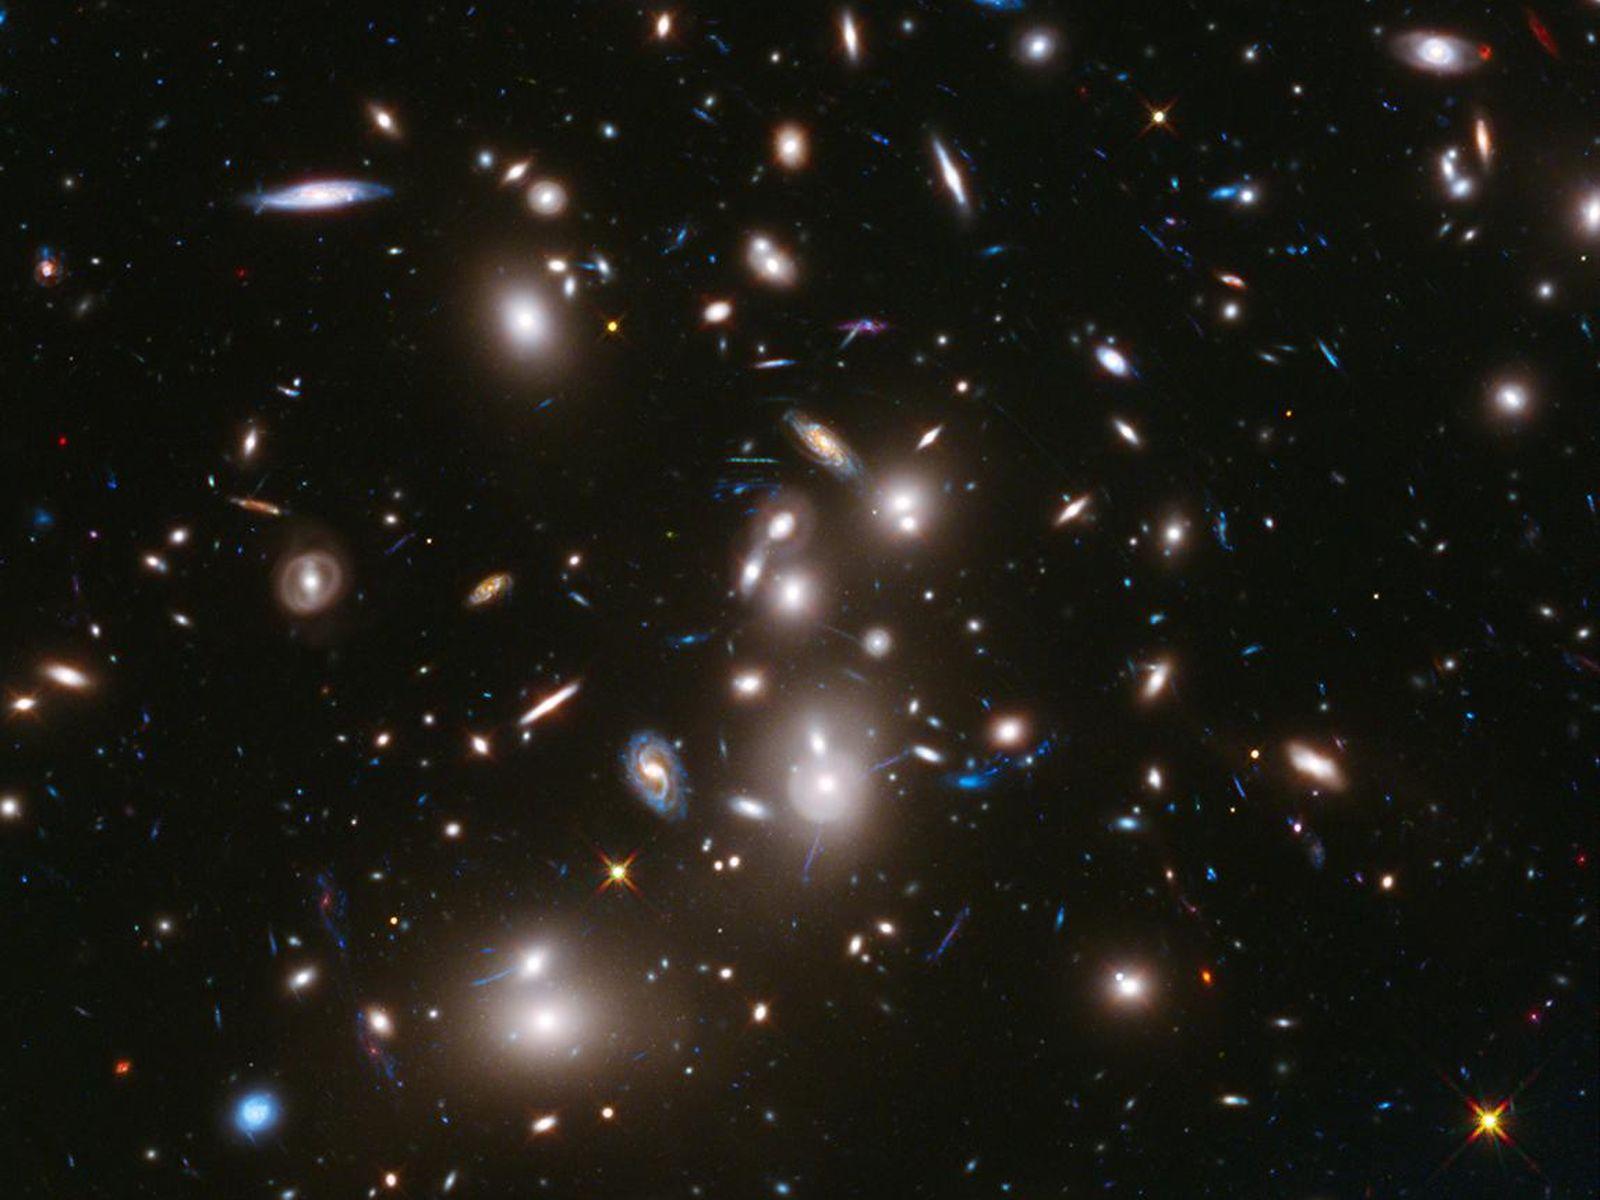 Space Image. Hubble Frontier Field Abell 2744